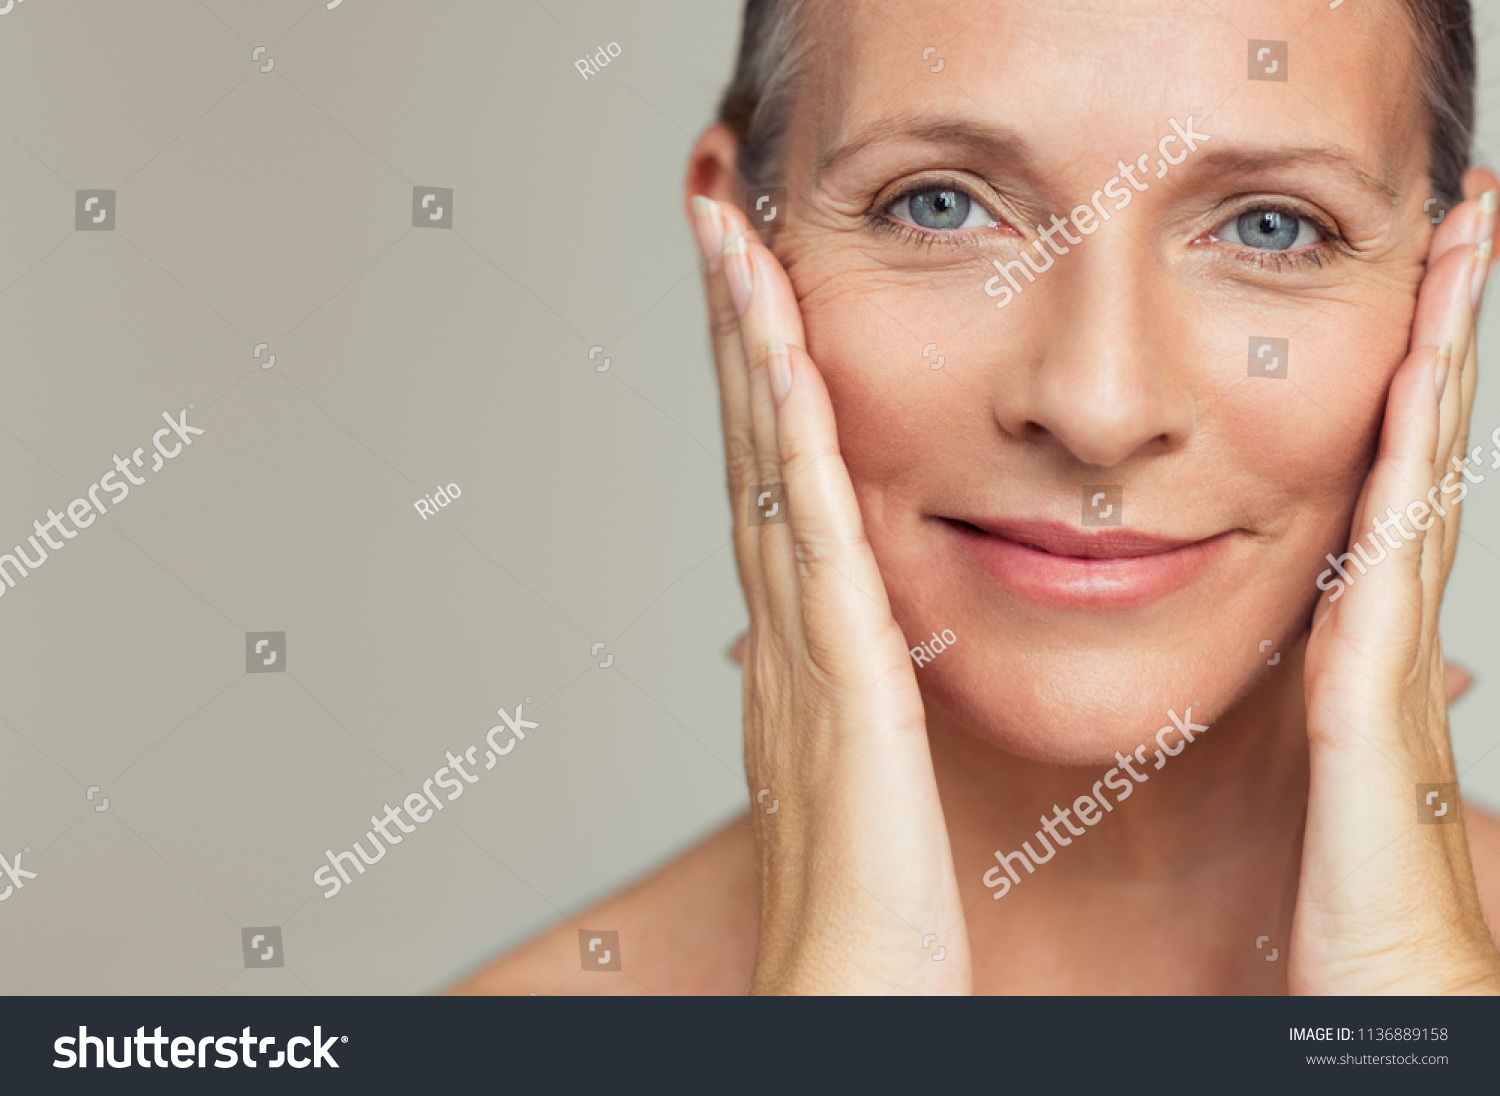 Naked Mature Woman Images Stock Photos Vectors Shutterstock